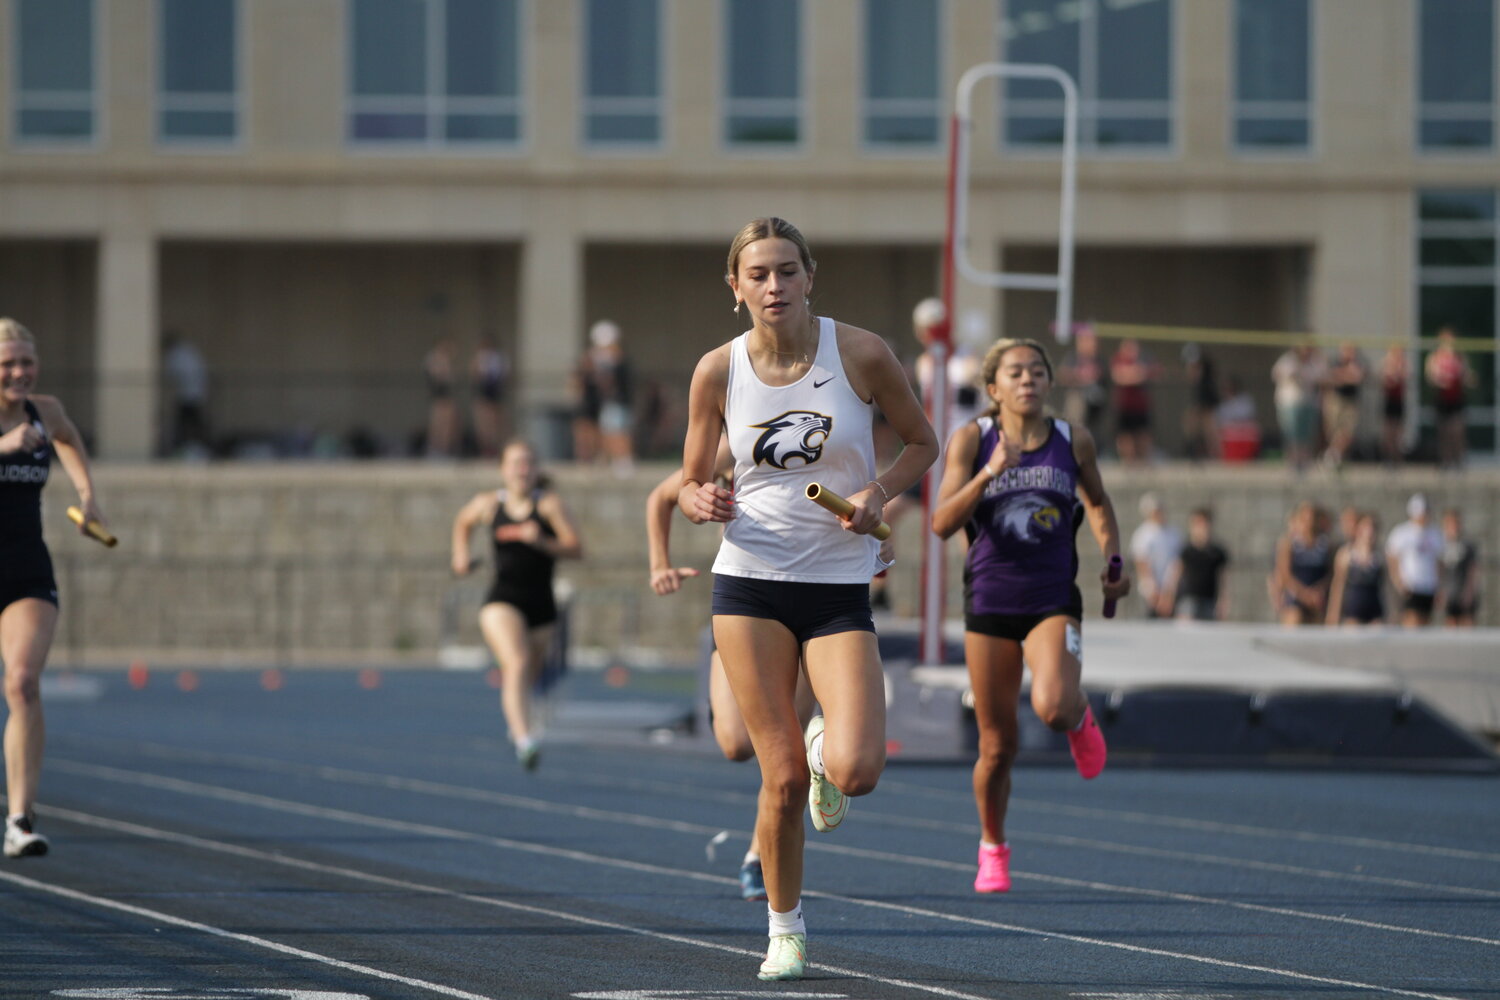 River Falls senior Rebecca Randleman finishes the final leg of the girls’ 4x100-meter relay at the WIAA Division 1 regional meet in Hudson on Monday, May 22. Randleman later qualified for the state championships in the 100-meter dash and as a part of the 4x200-meter relay.